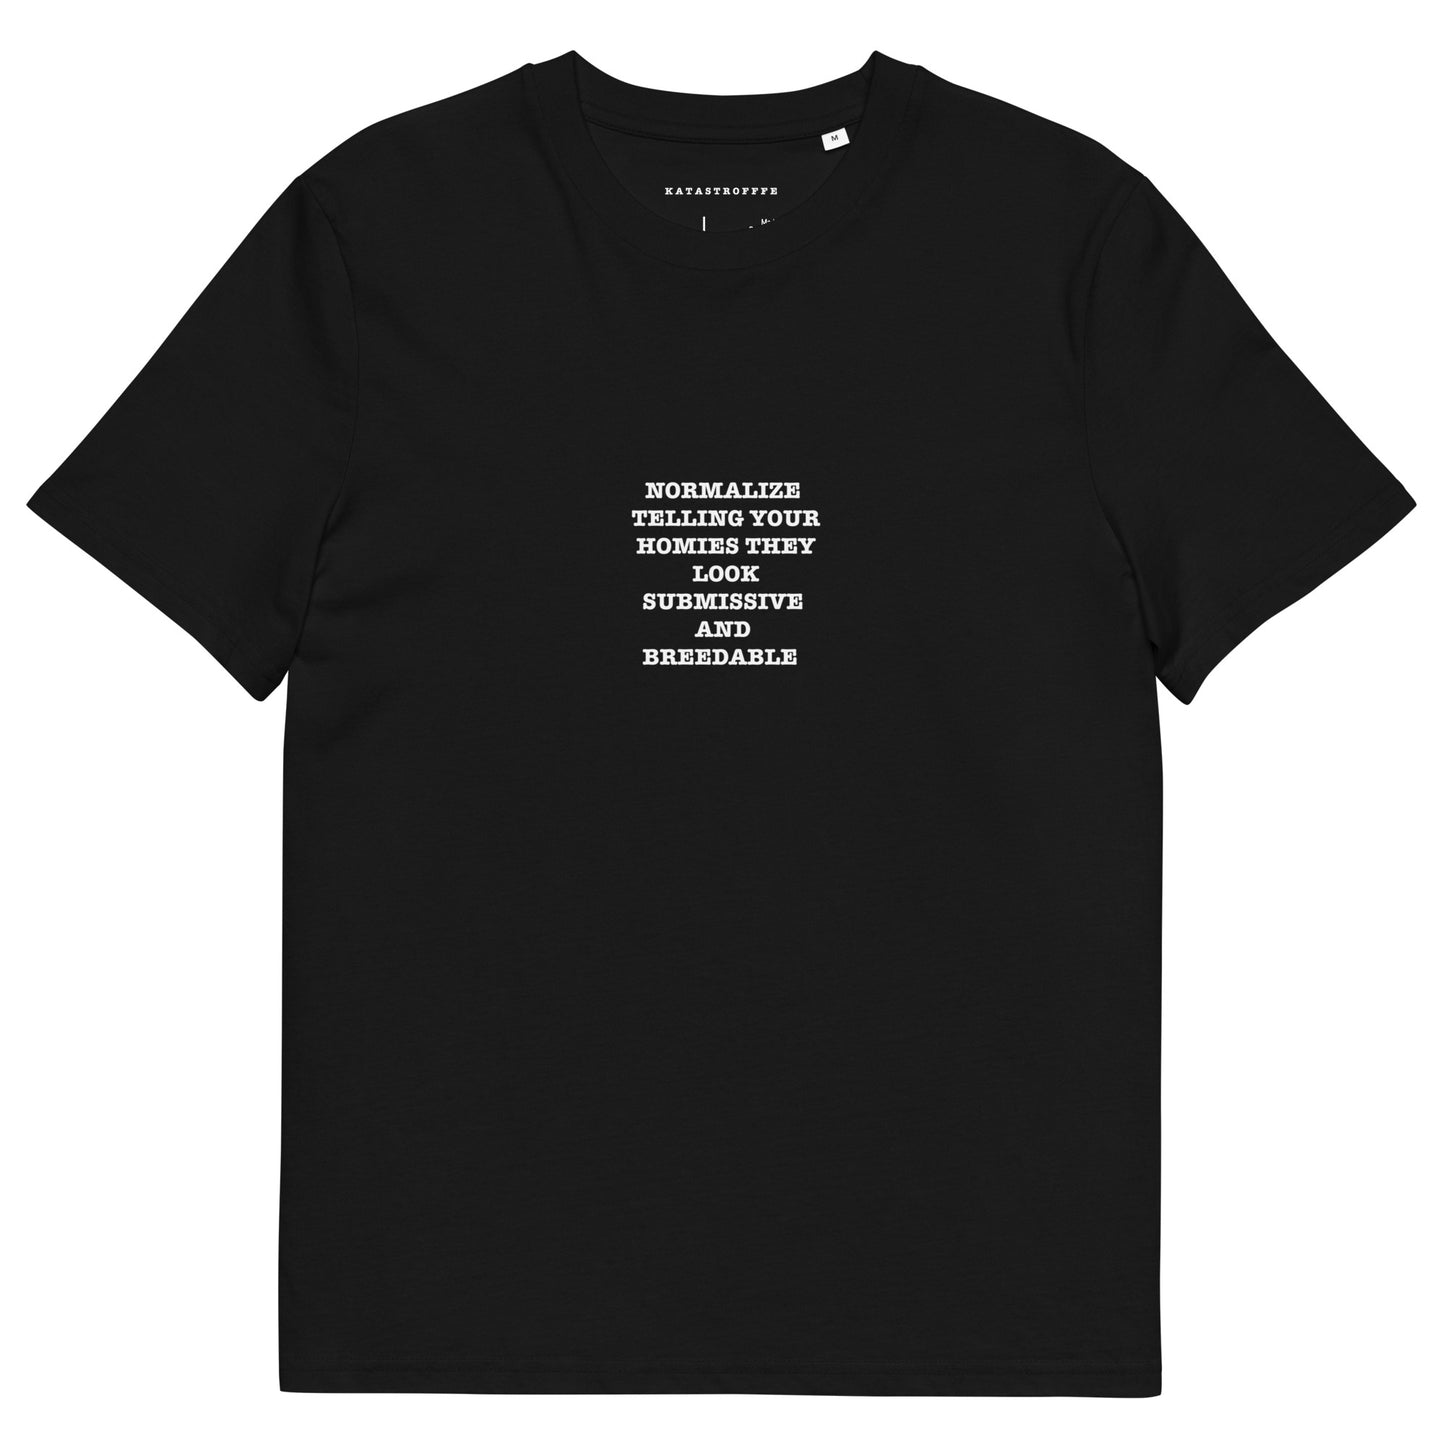 NORMALIZE  TELLING YOUR HOMIES THEY LOOK SUBMISSIVE  AND  BREEDABLE  Unisex organic cotton t-shirt